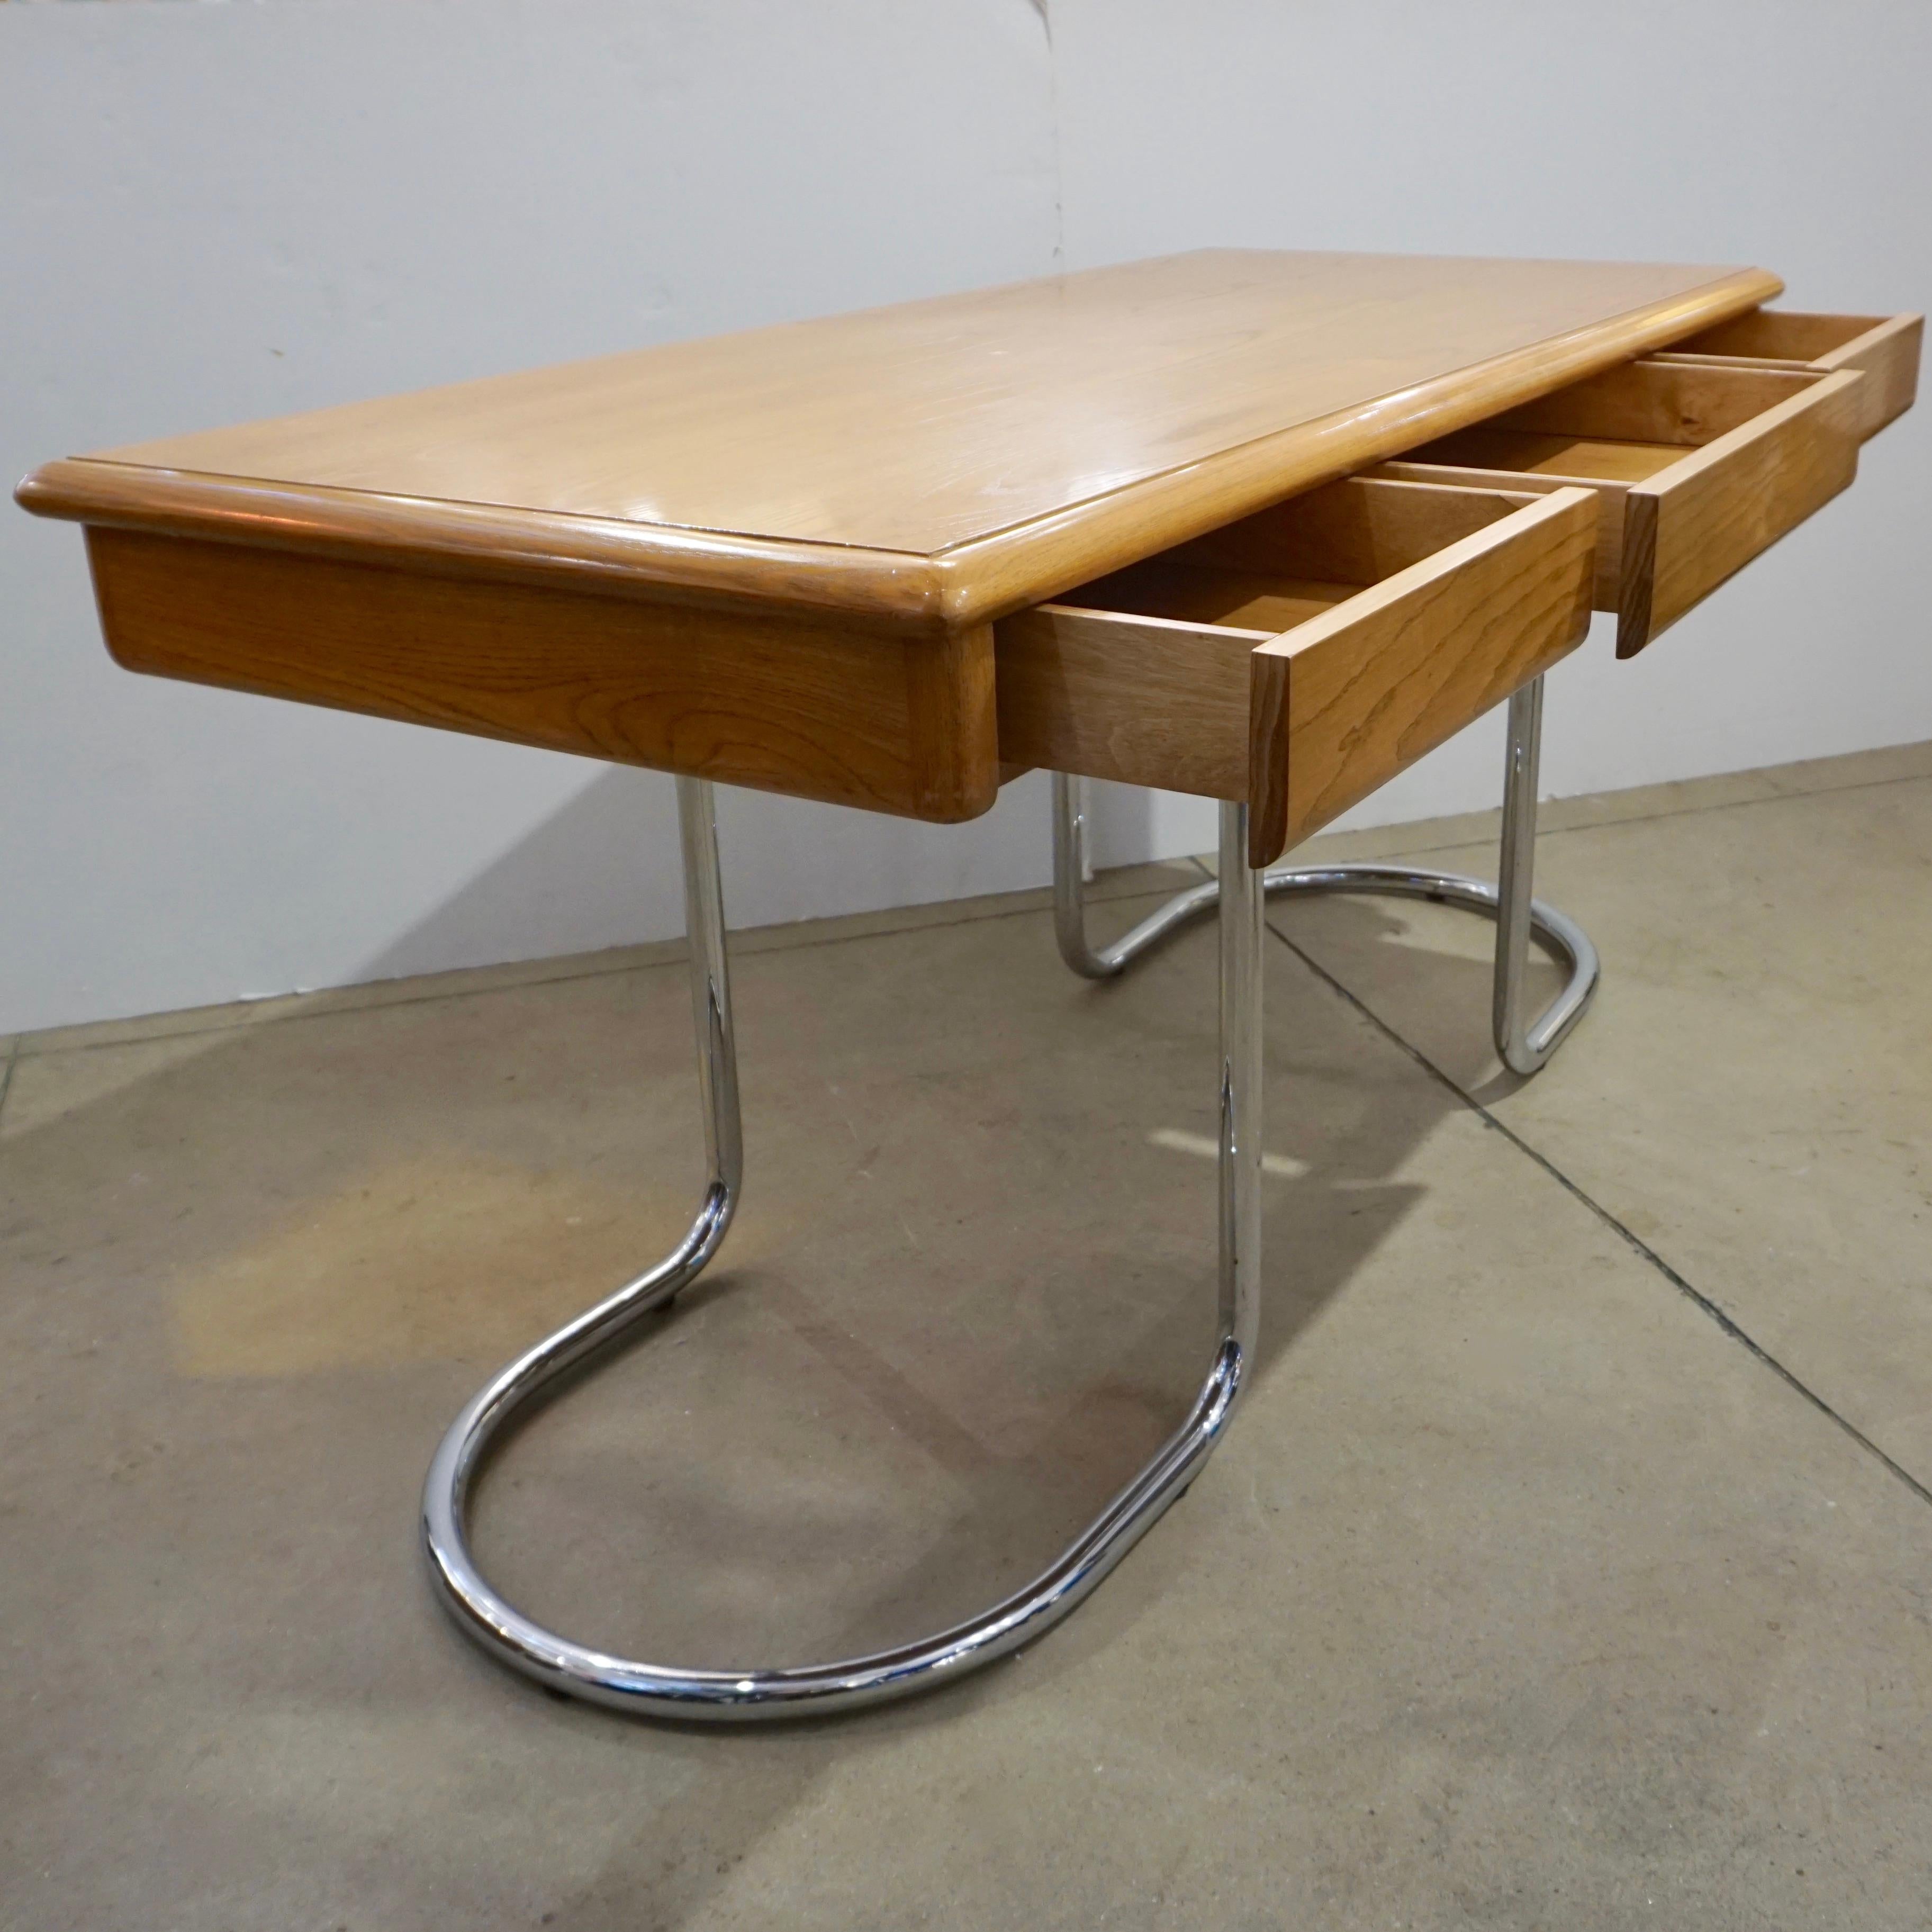 1970s Italian Vintage Curved Nickel Legs 3-Drawer Ash Tree Center Desk/Console For Sale 4